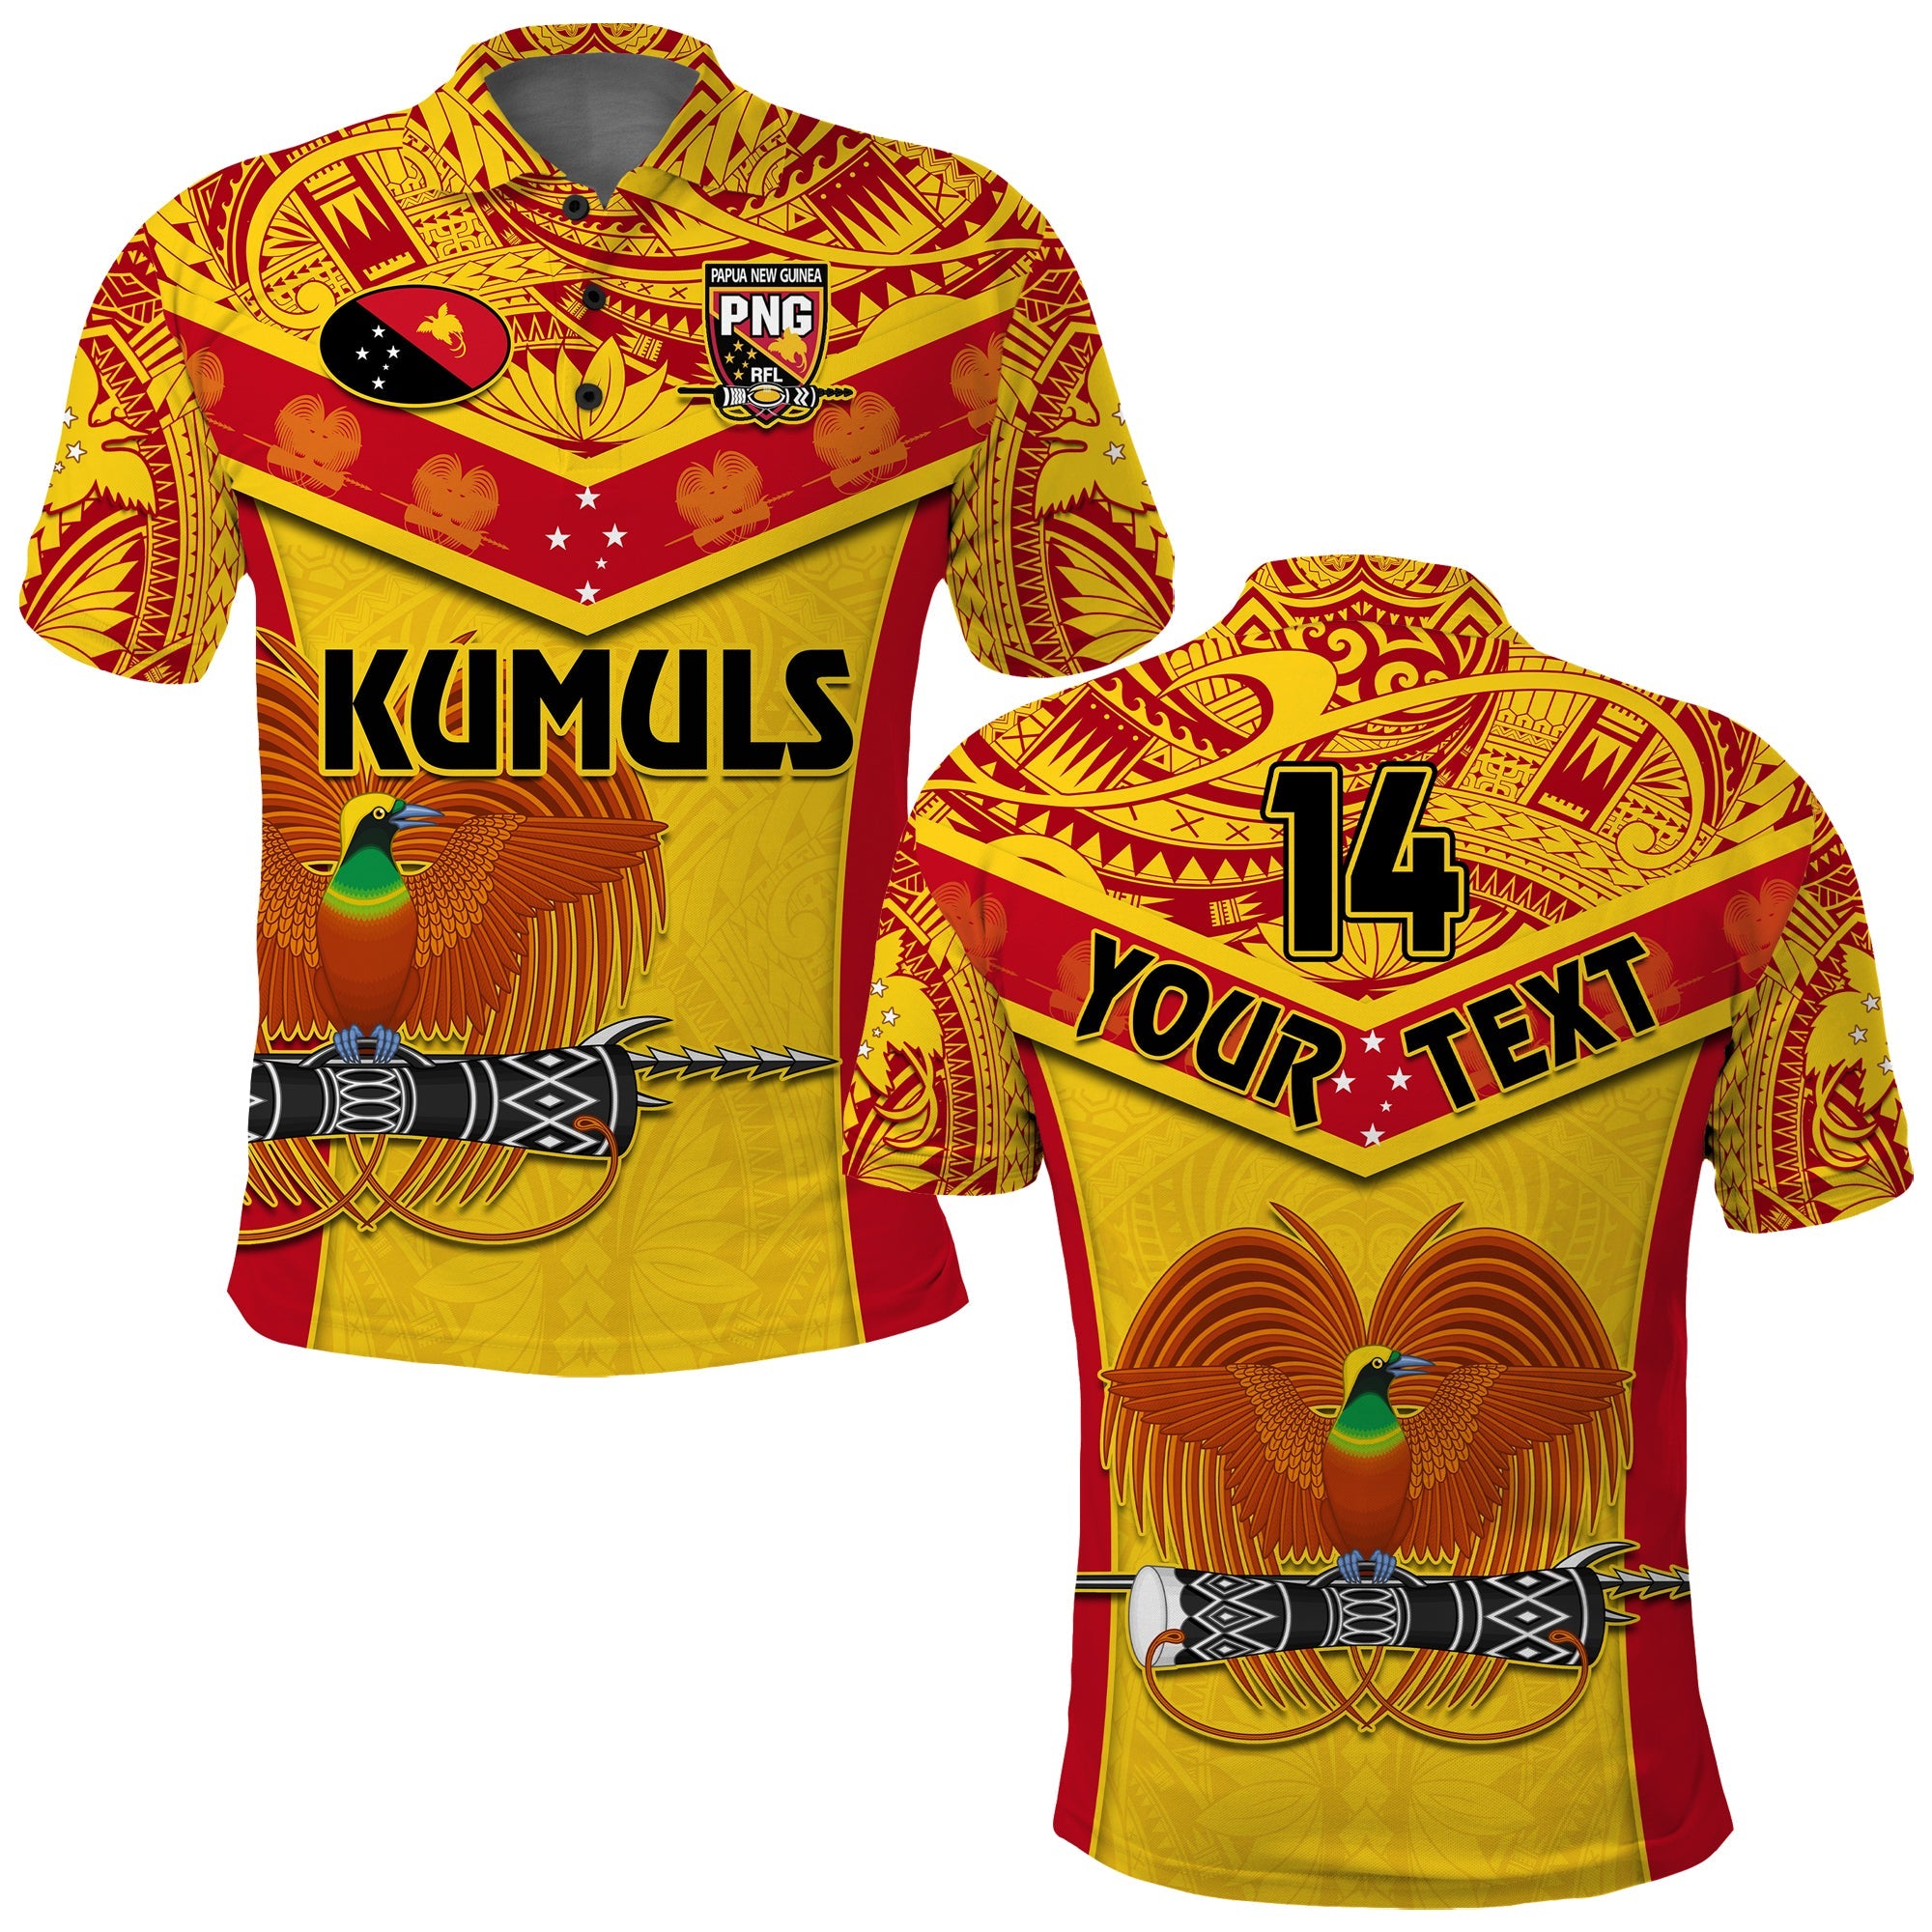 (Custom Text and Number) Papua New Guinea Rugby Polo Shirt PNG Kumuls Bird Of Paradise Yellow LT14 Adult Yellow - Polynesian Pride